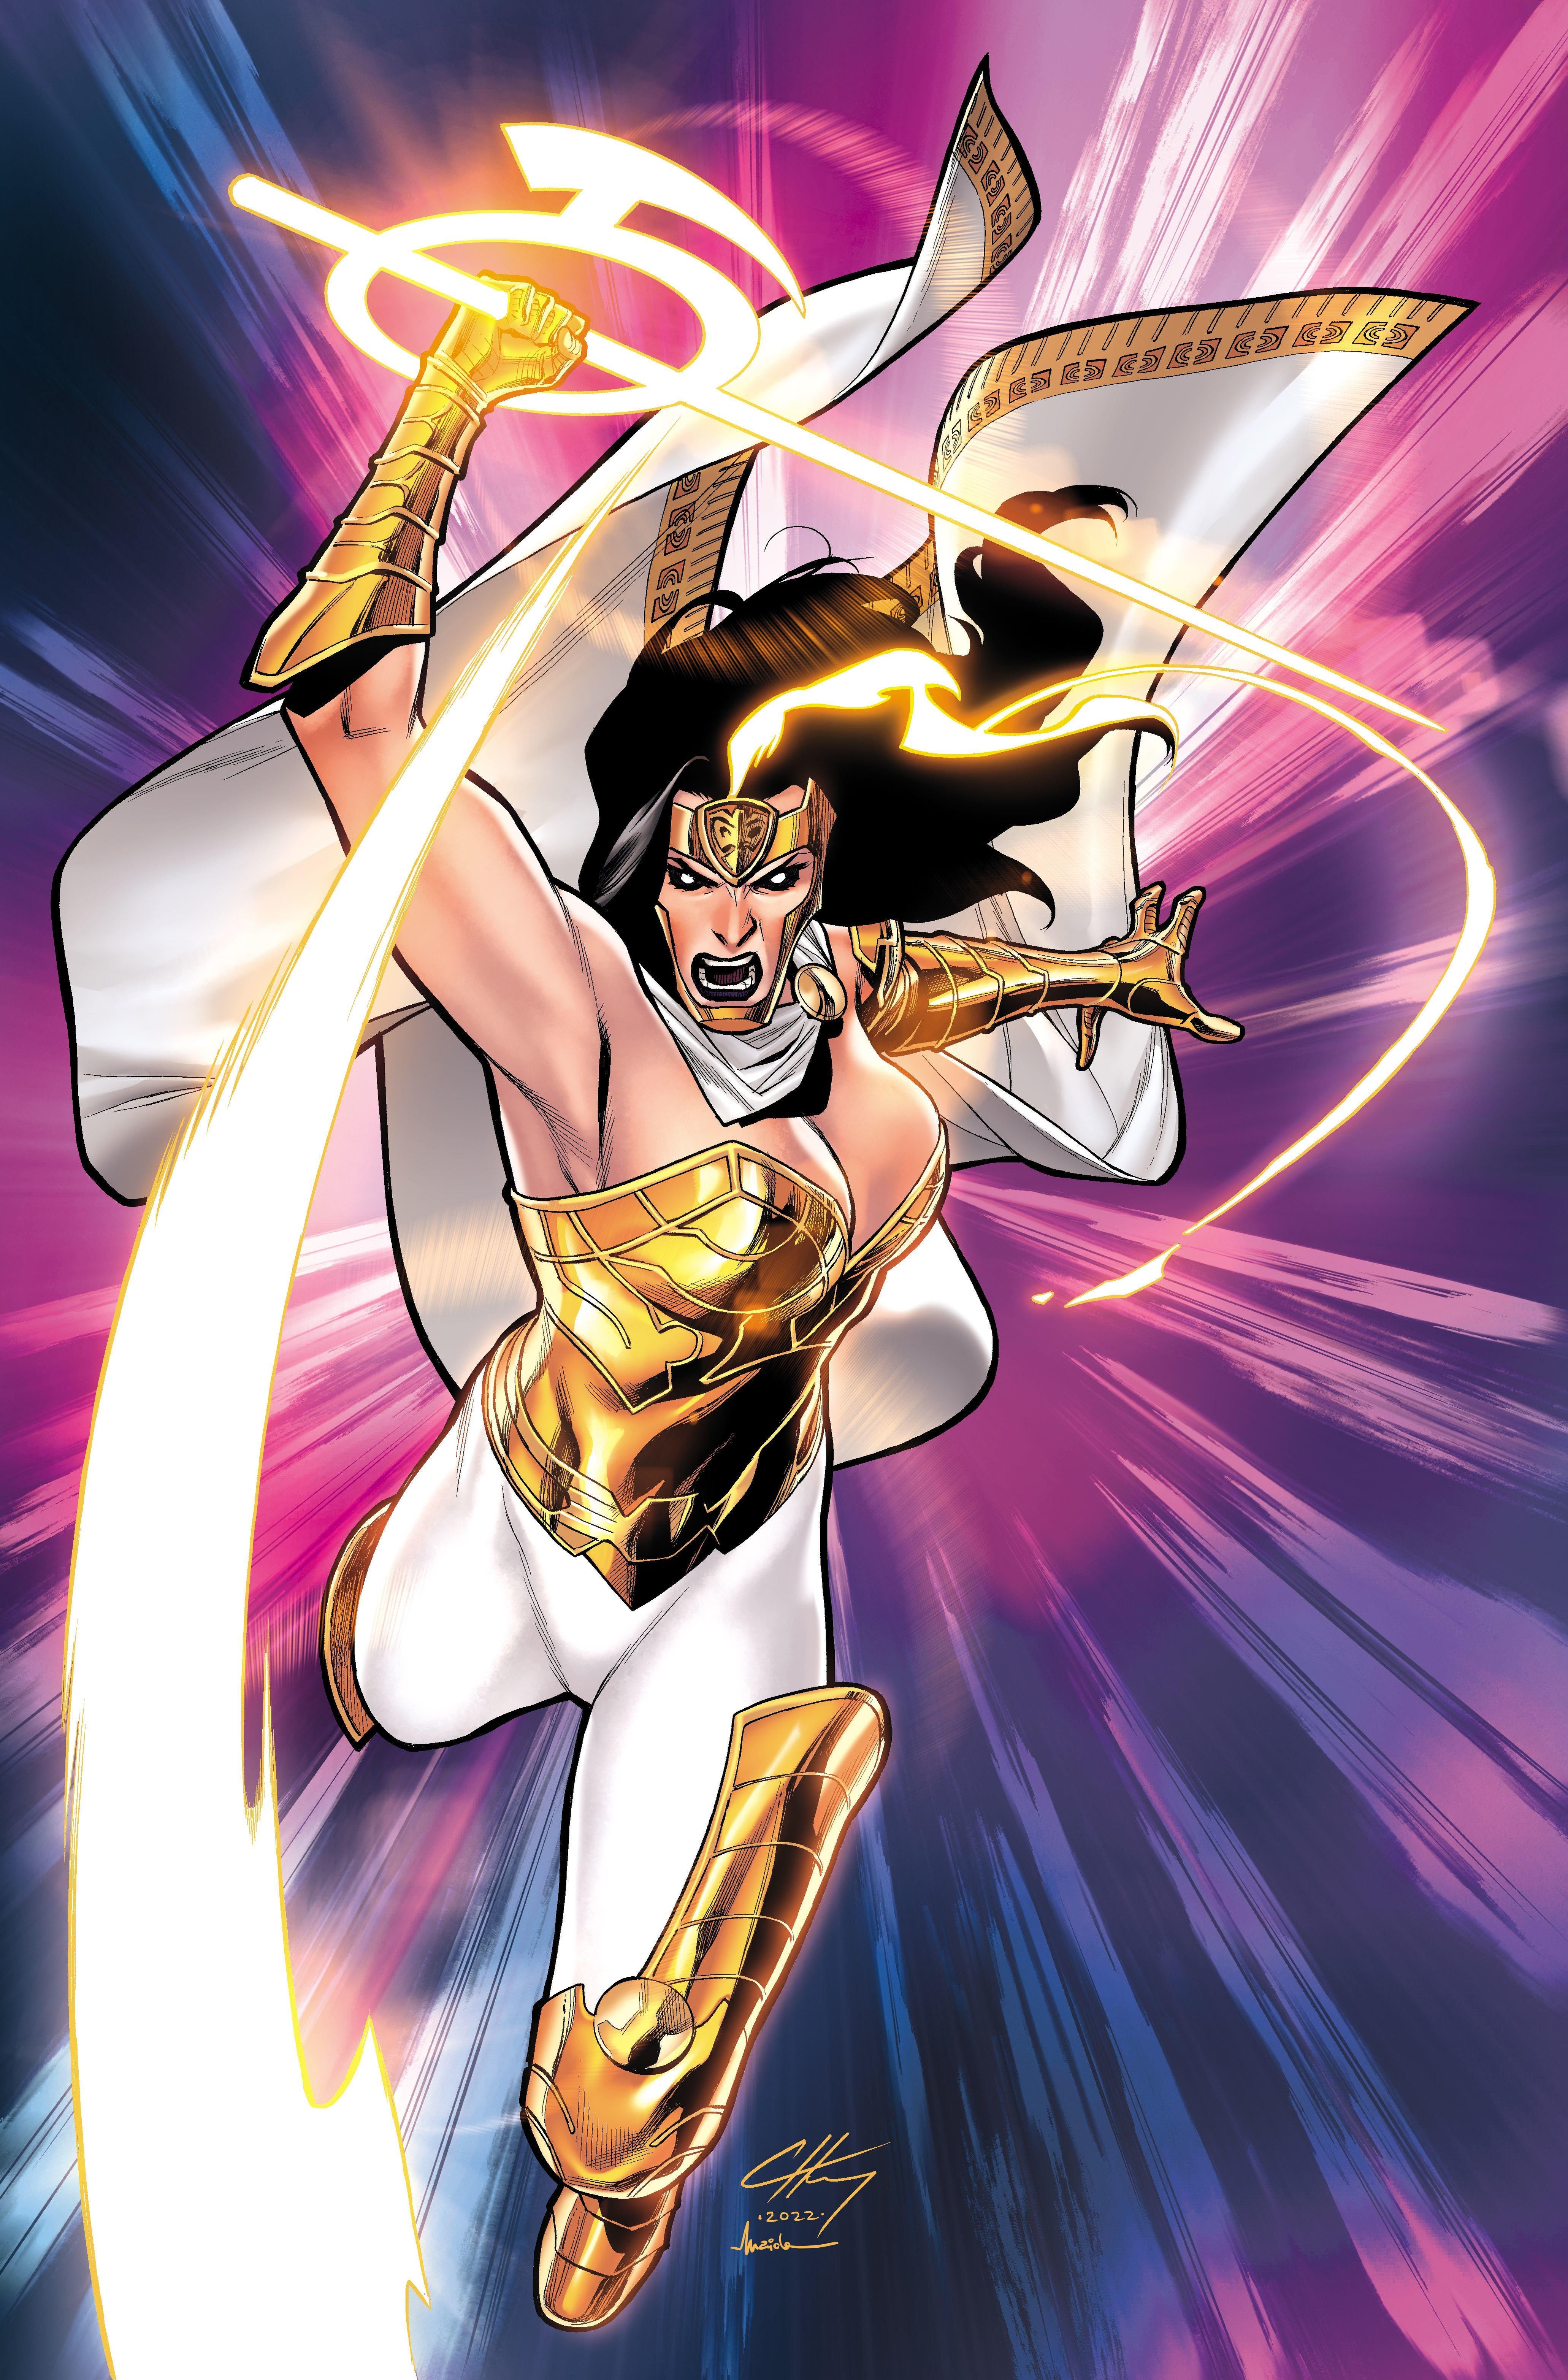 tales-from-earth-6-a-celebration-of-stan-lee-1-wonder-woman-open-to-order-variant-henry.jpg